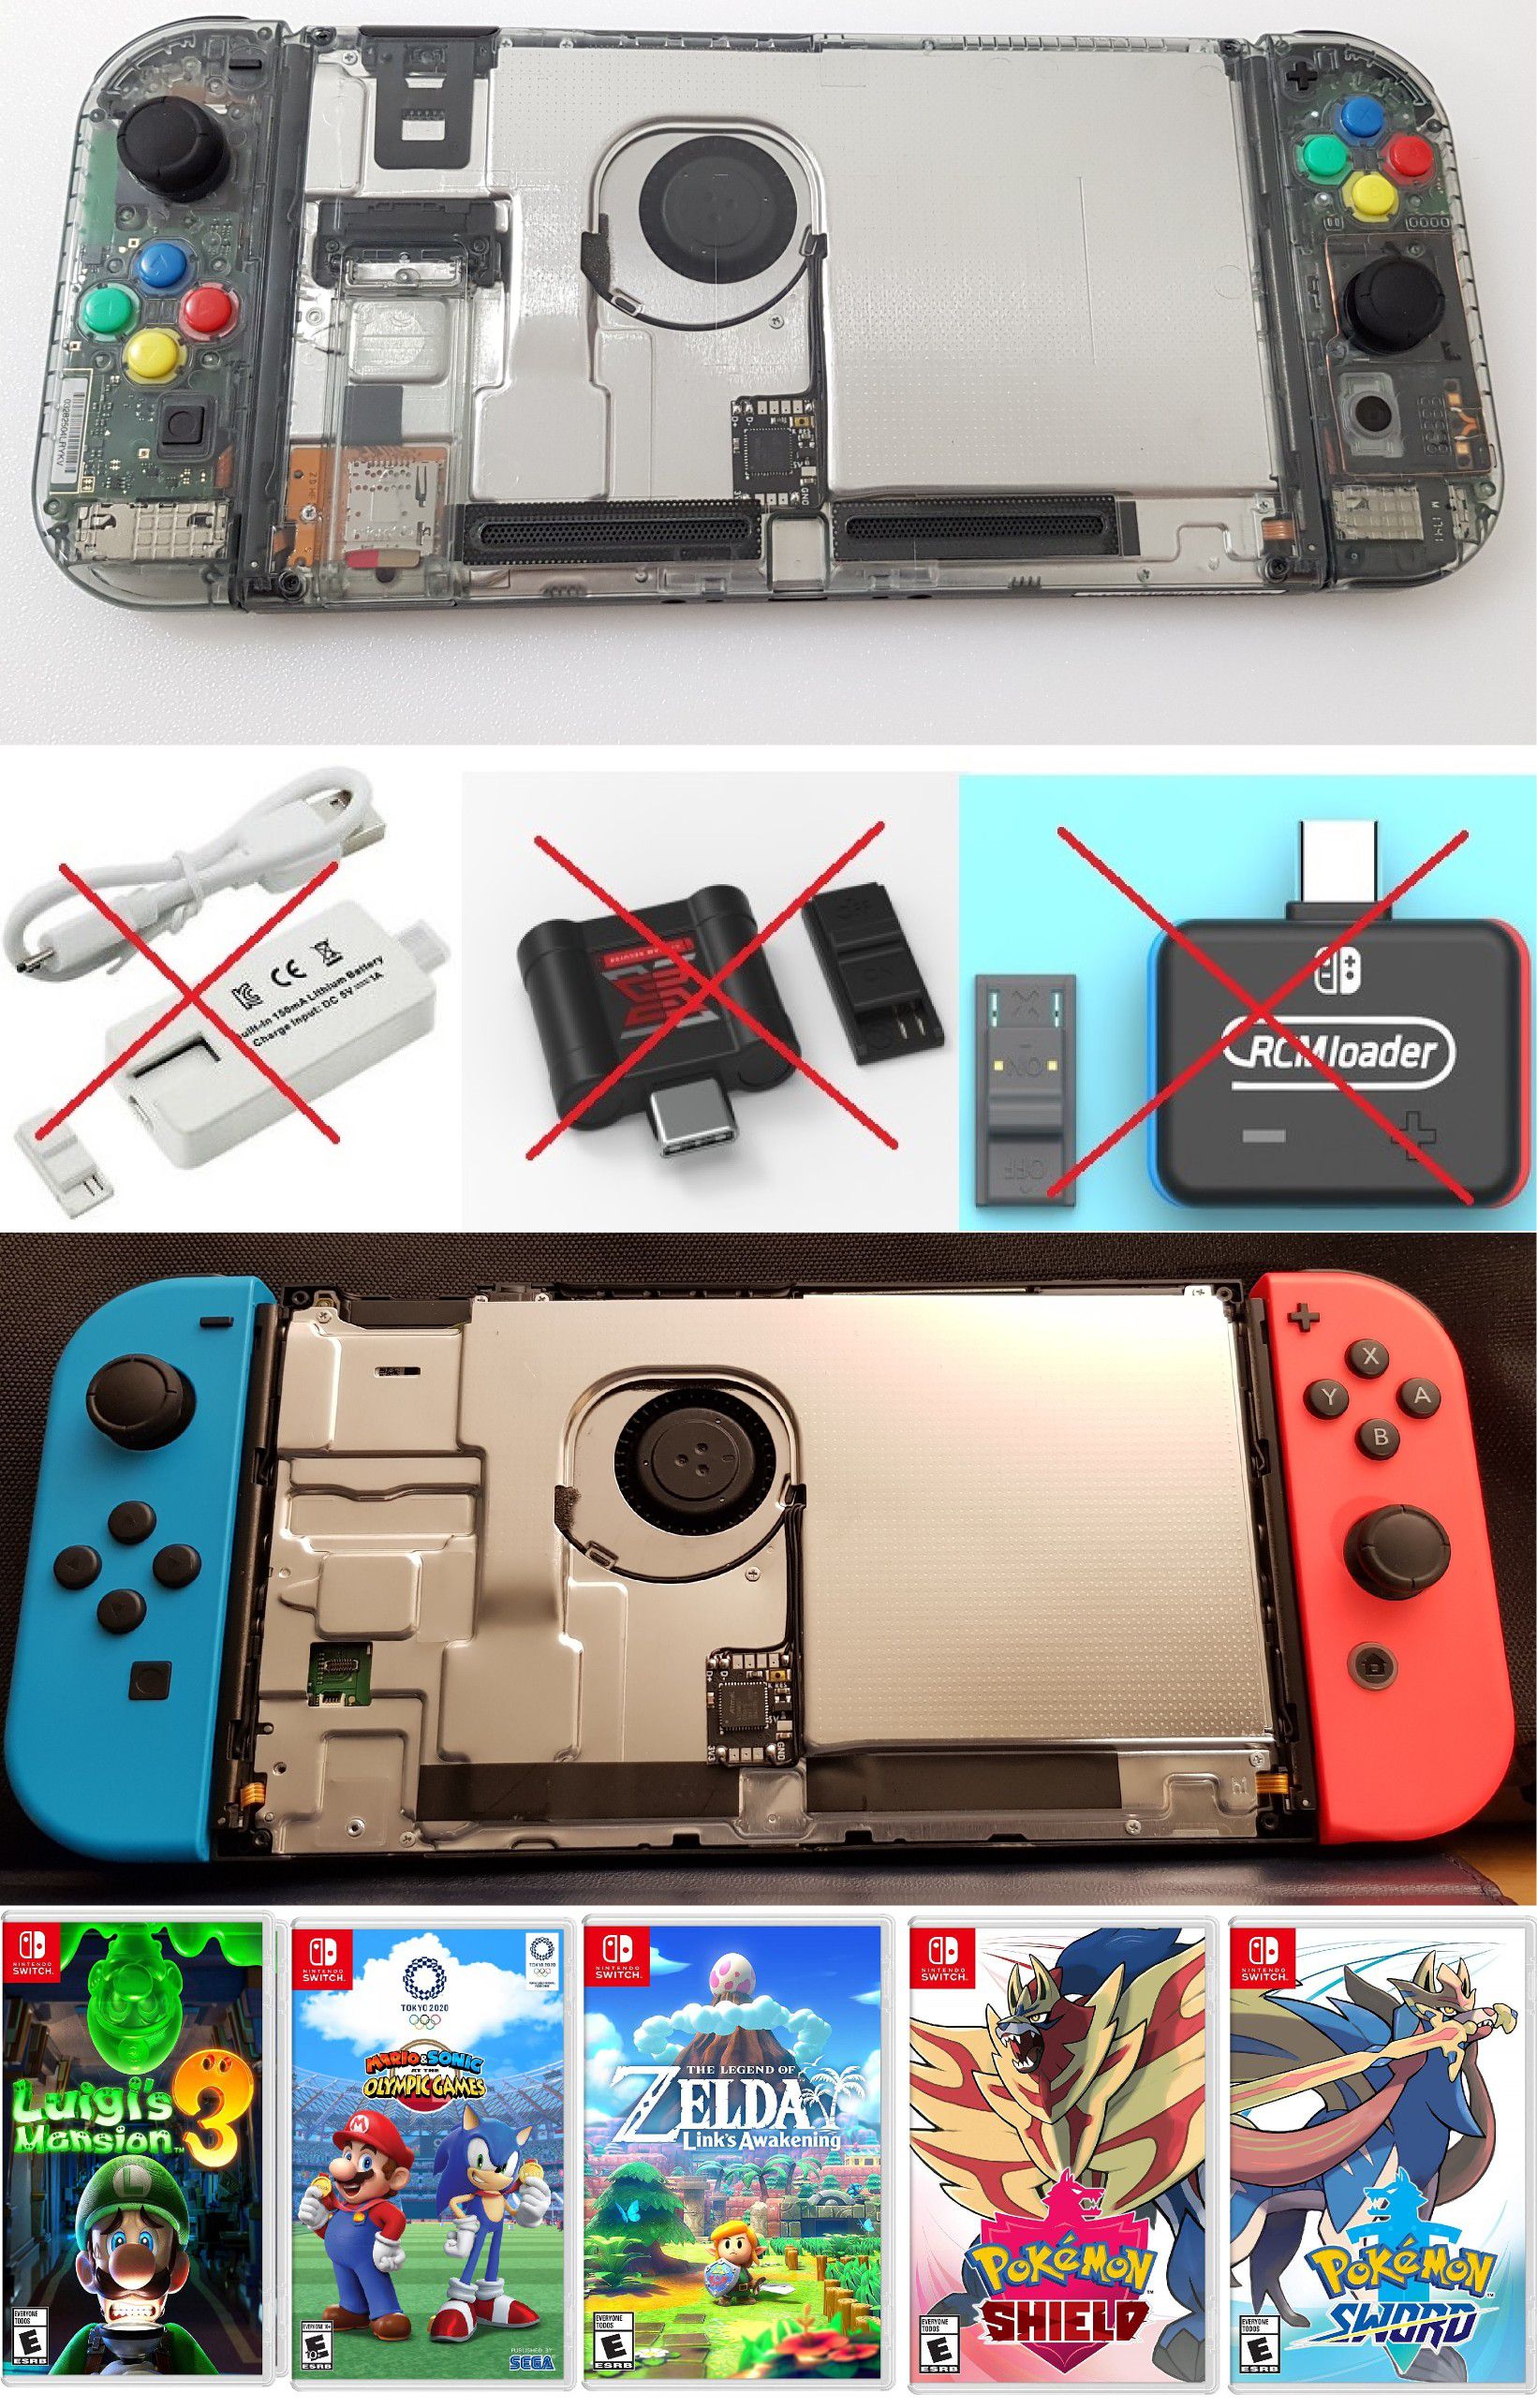 Nintendo Switch Mods and Games - Mod-Chip installation, Dual System safe online, Retro games, TX sxos license included, 512gb Samsung Evo plus $60